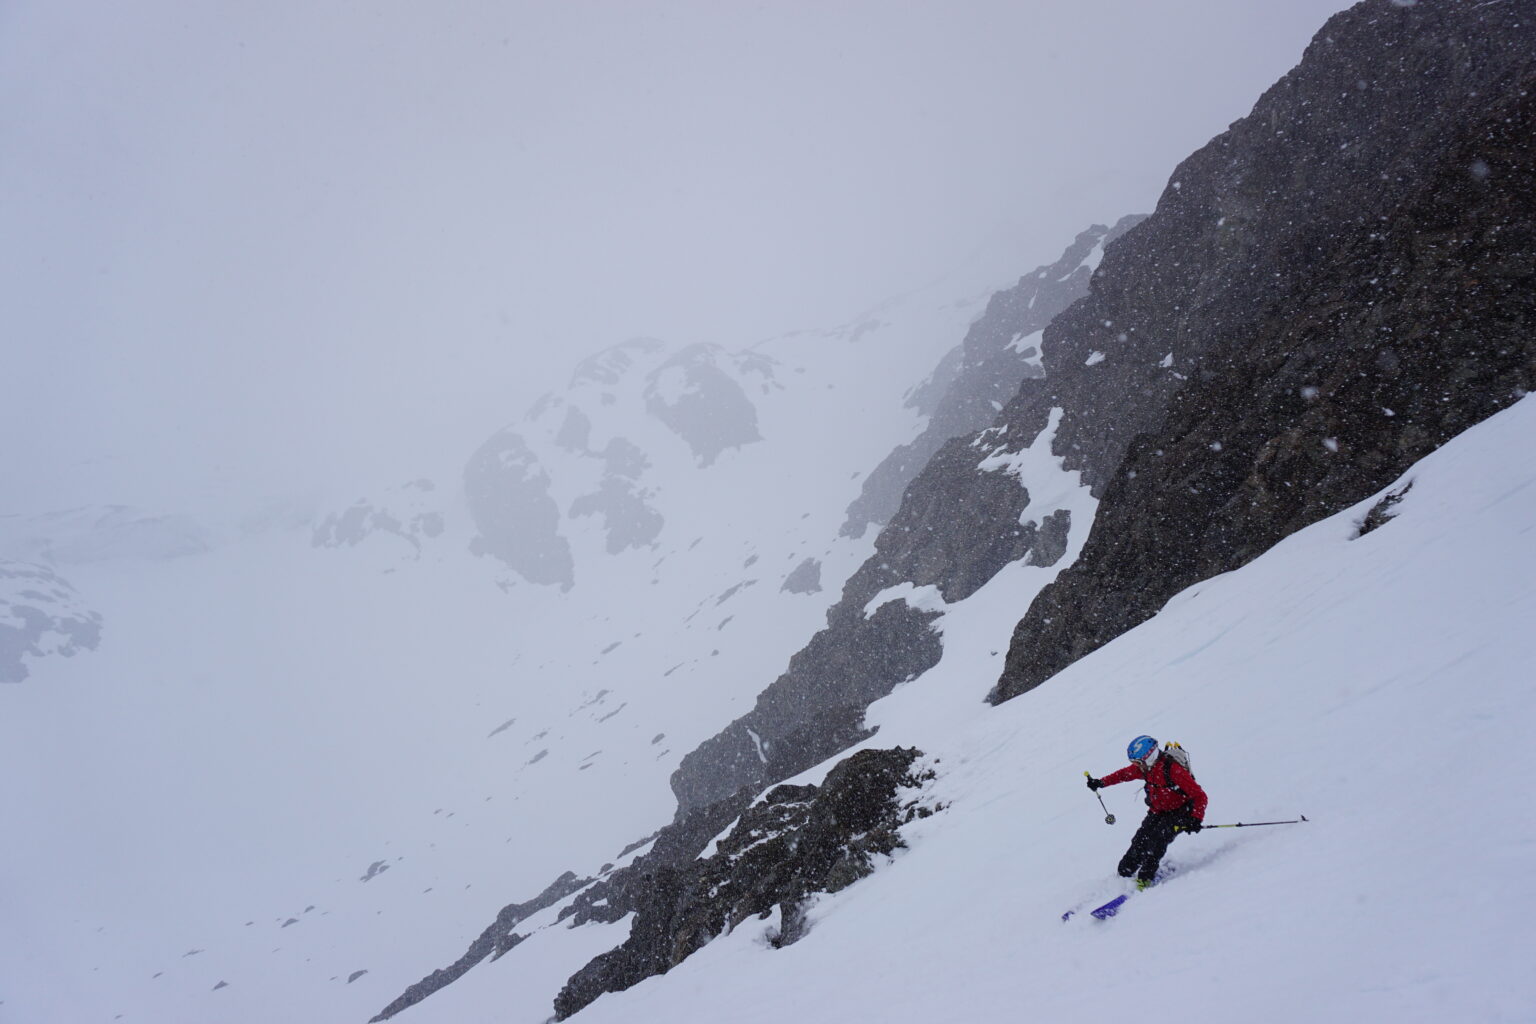 Skiing off the south slope of Koppangsfjellet